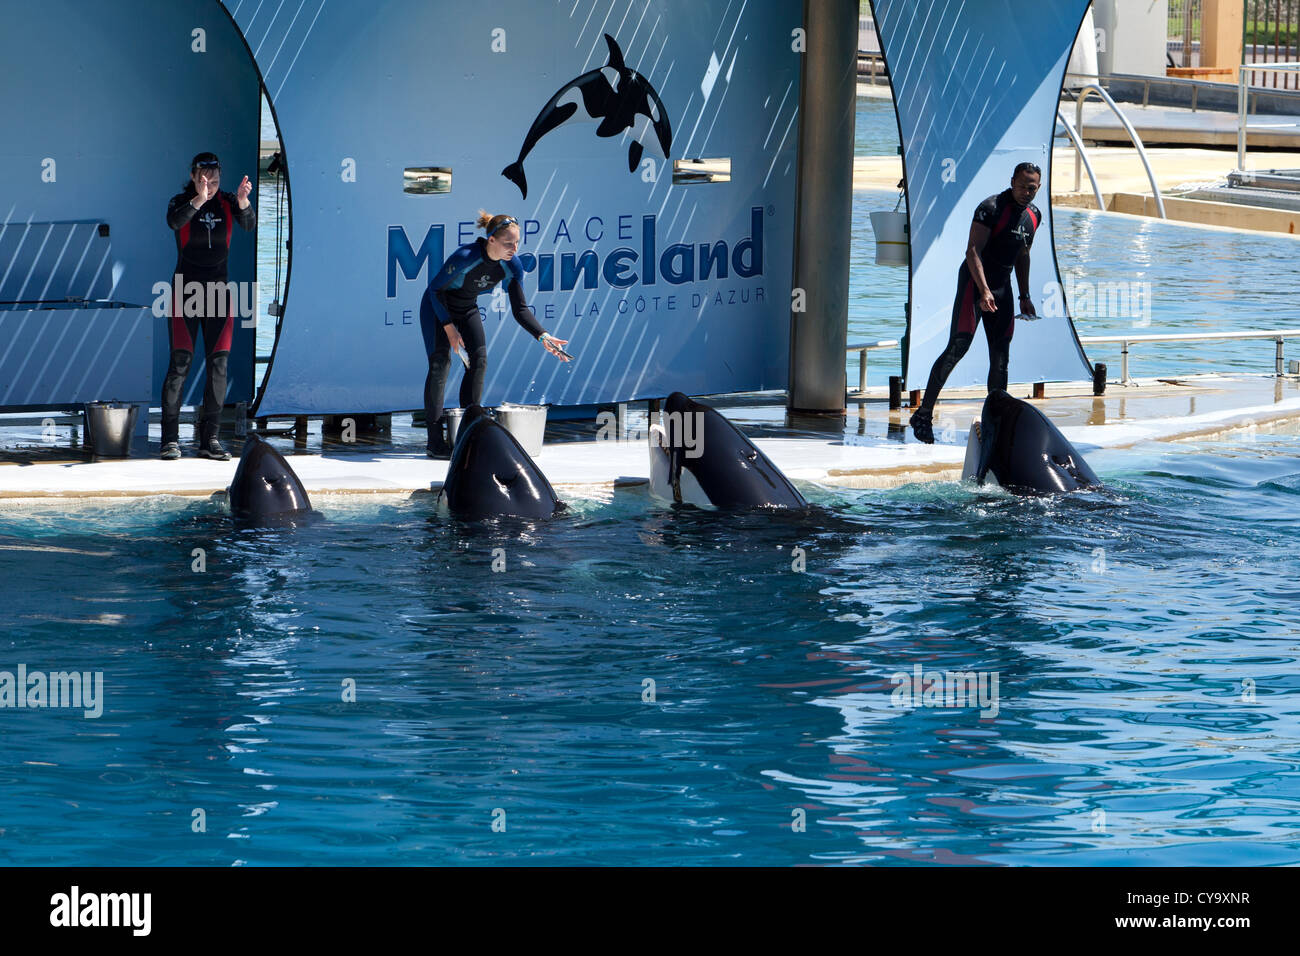 Editorial ** Antibes, France - May 3, 2012: Marineland whale trainers working with killer whales. Stock Photo